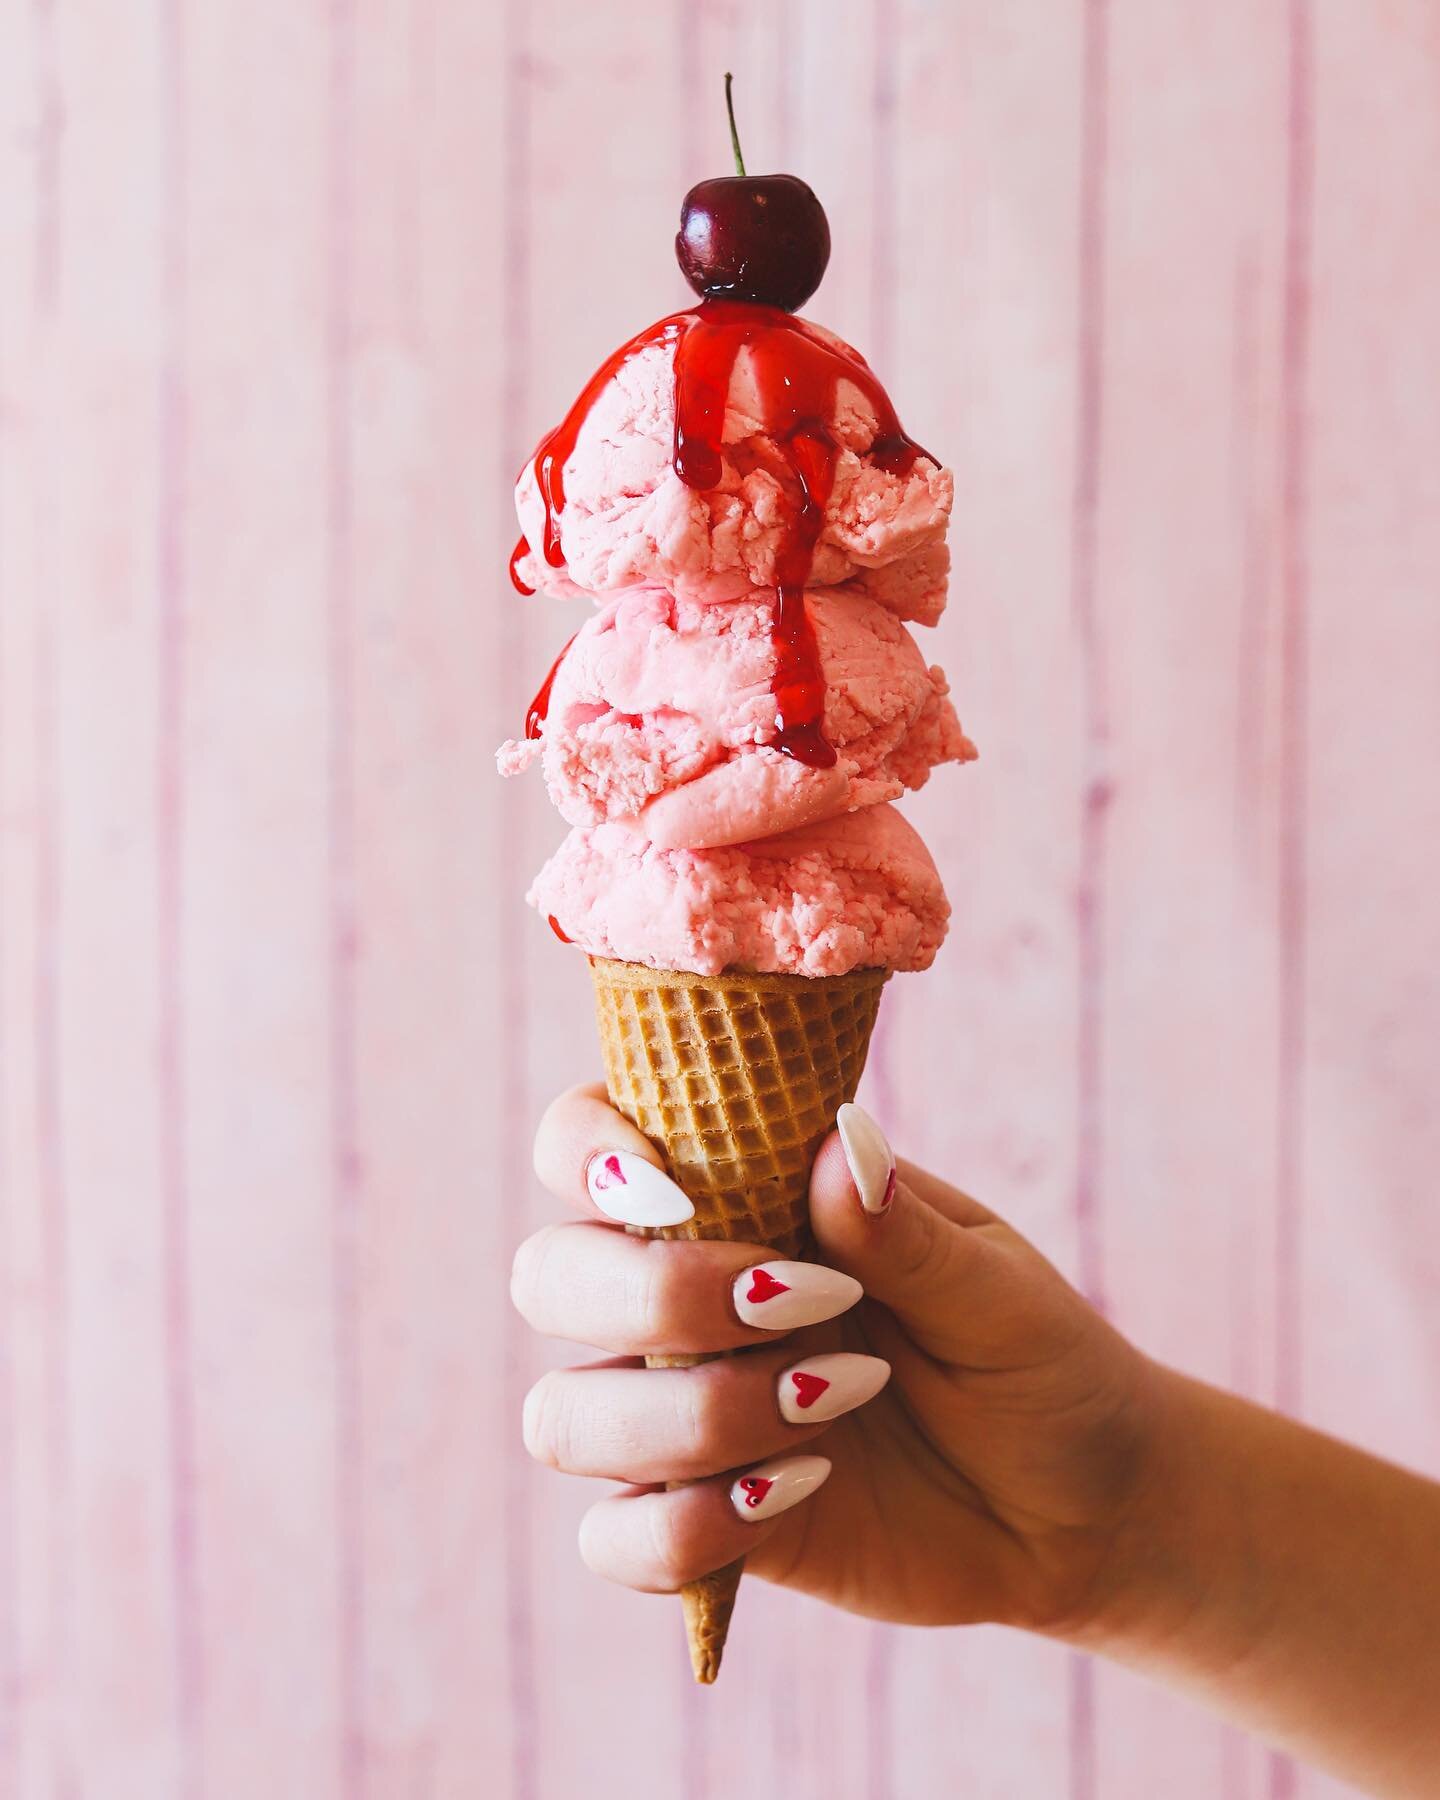 Sugar is in the air! 🍦🍒Having fun with sweet treats and fake ice cream! Hand model and assisting by @abbyy.spinneyy!

#foodphotographer #foodstylist #mainefoodphotographer #icecream #fakeicecream #pinkicecream #heart #portlandmaine